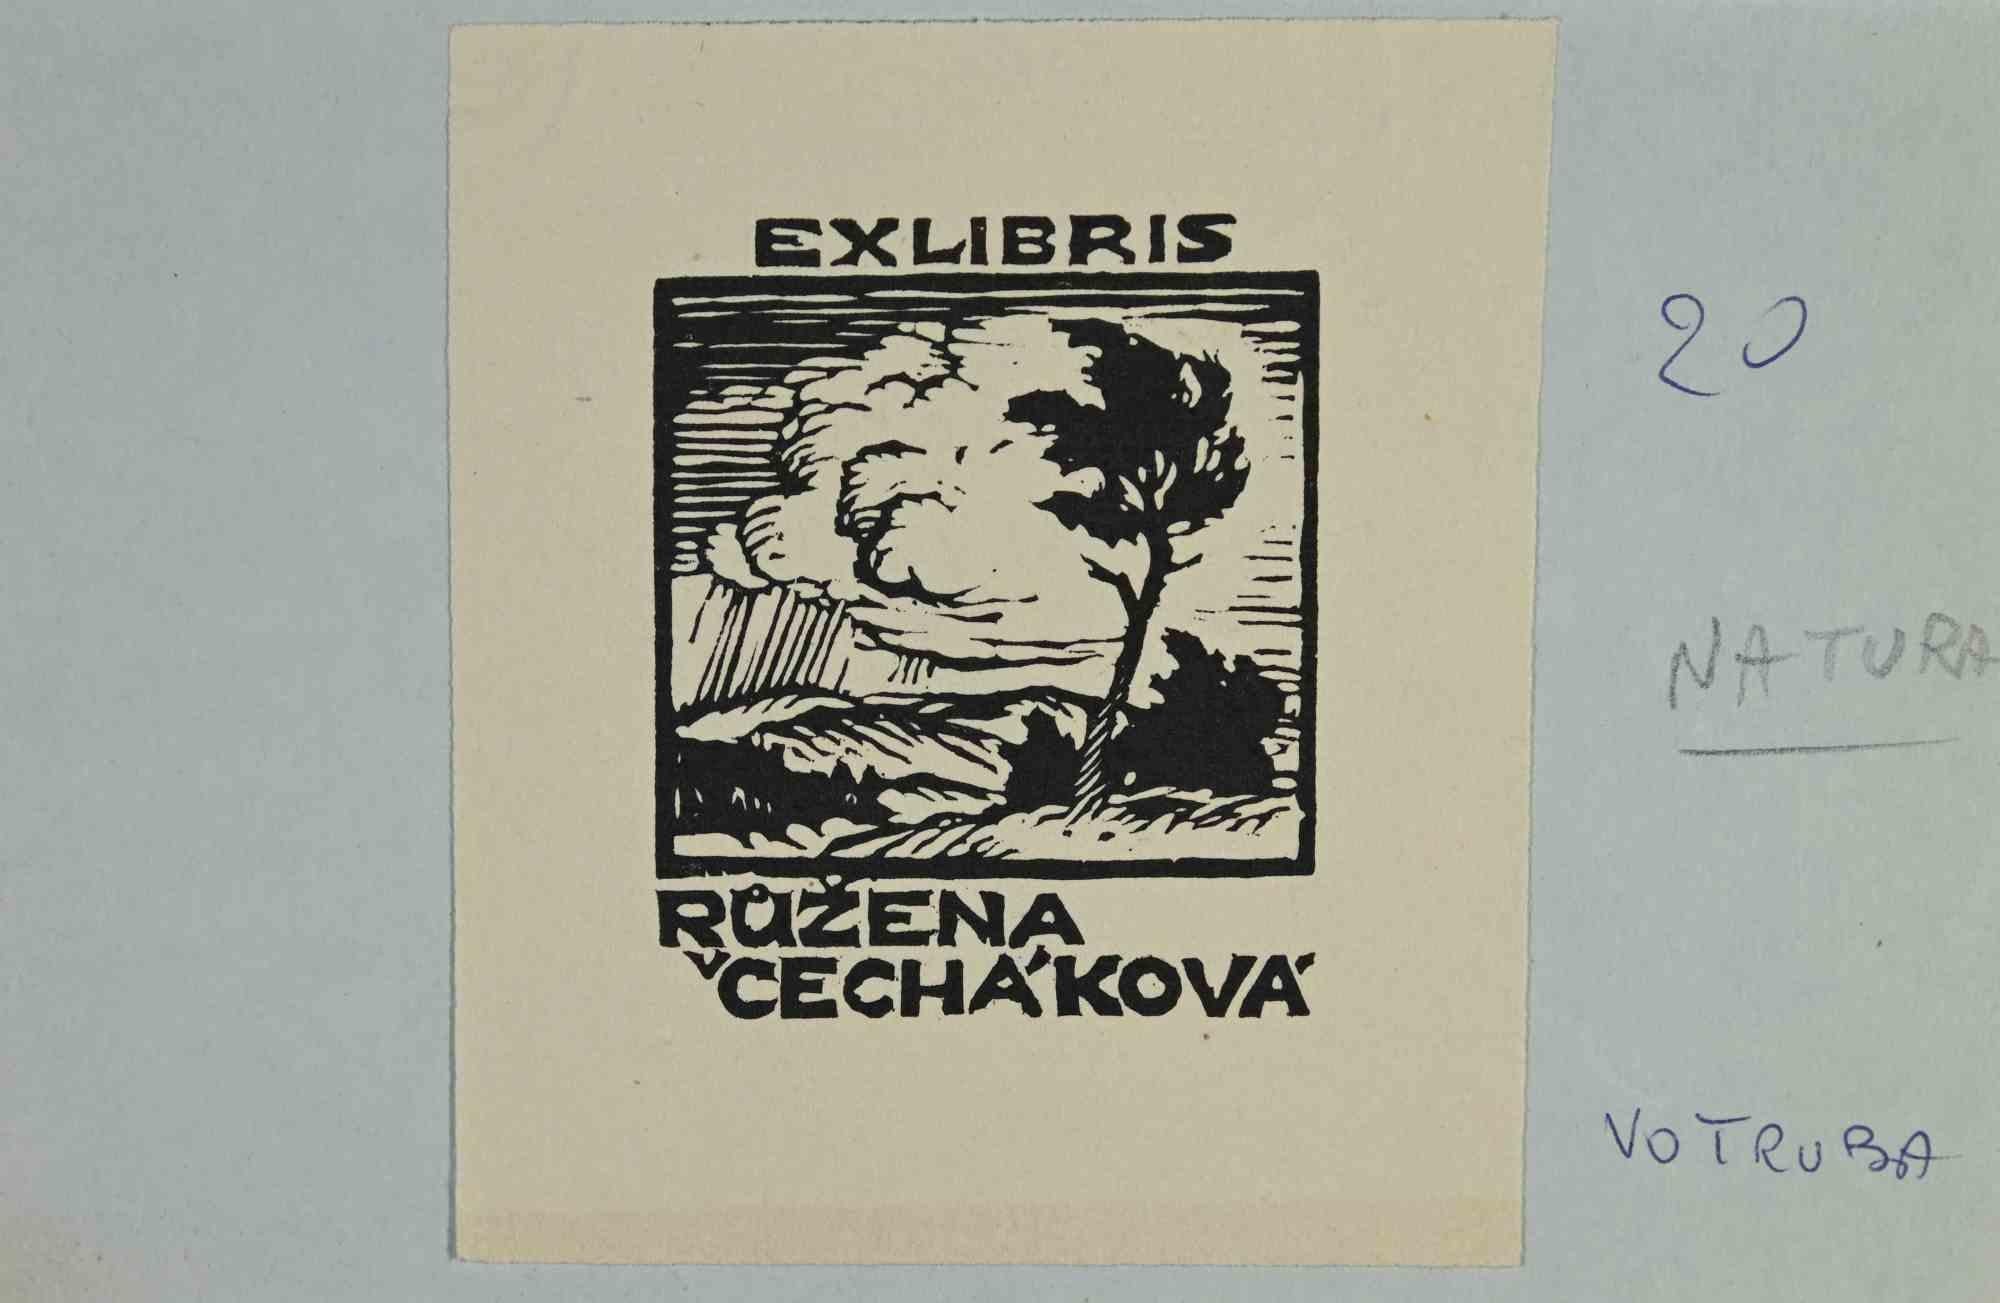 Ex-Libris - Ruzena Cecháková is an Artwork realized in 1930 s., by the Artist Jaroslav Votruba (1889-1971).

Woodcut print on paper. 

The work is glued on colored cardboard. Total dimensions: 13 x 20 cm.

Good conditions.

The artist wants to